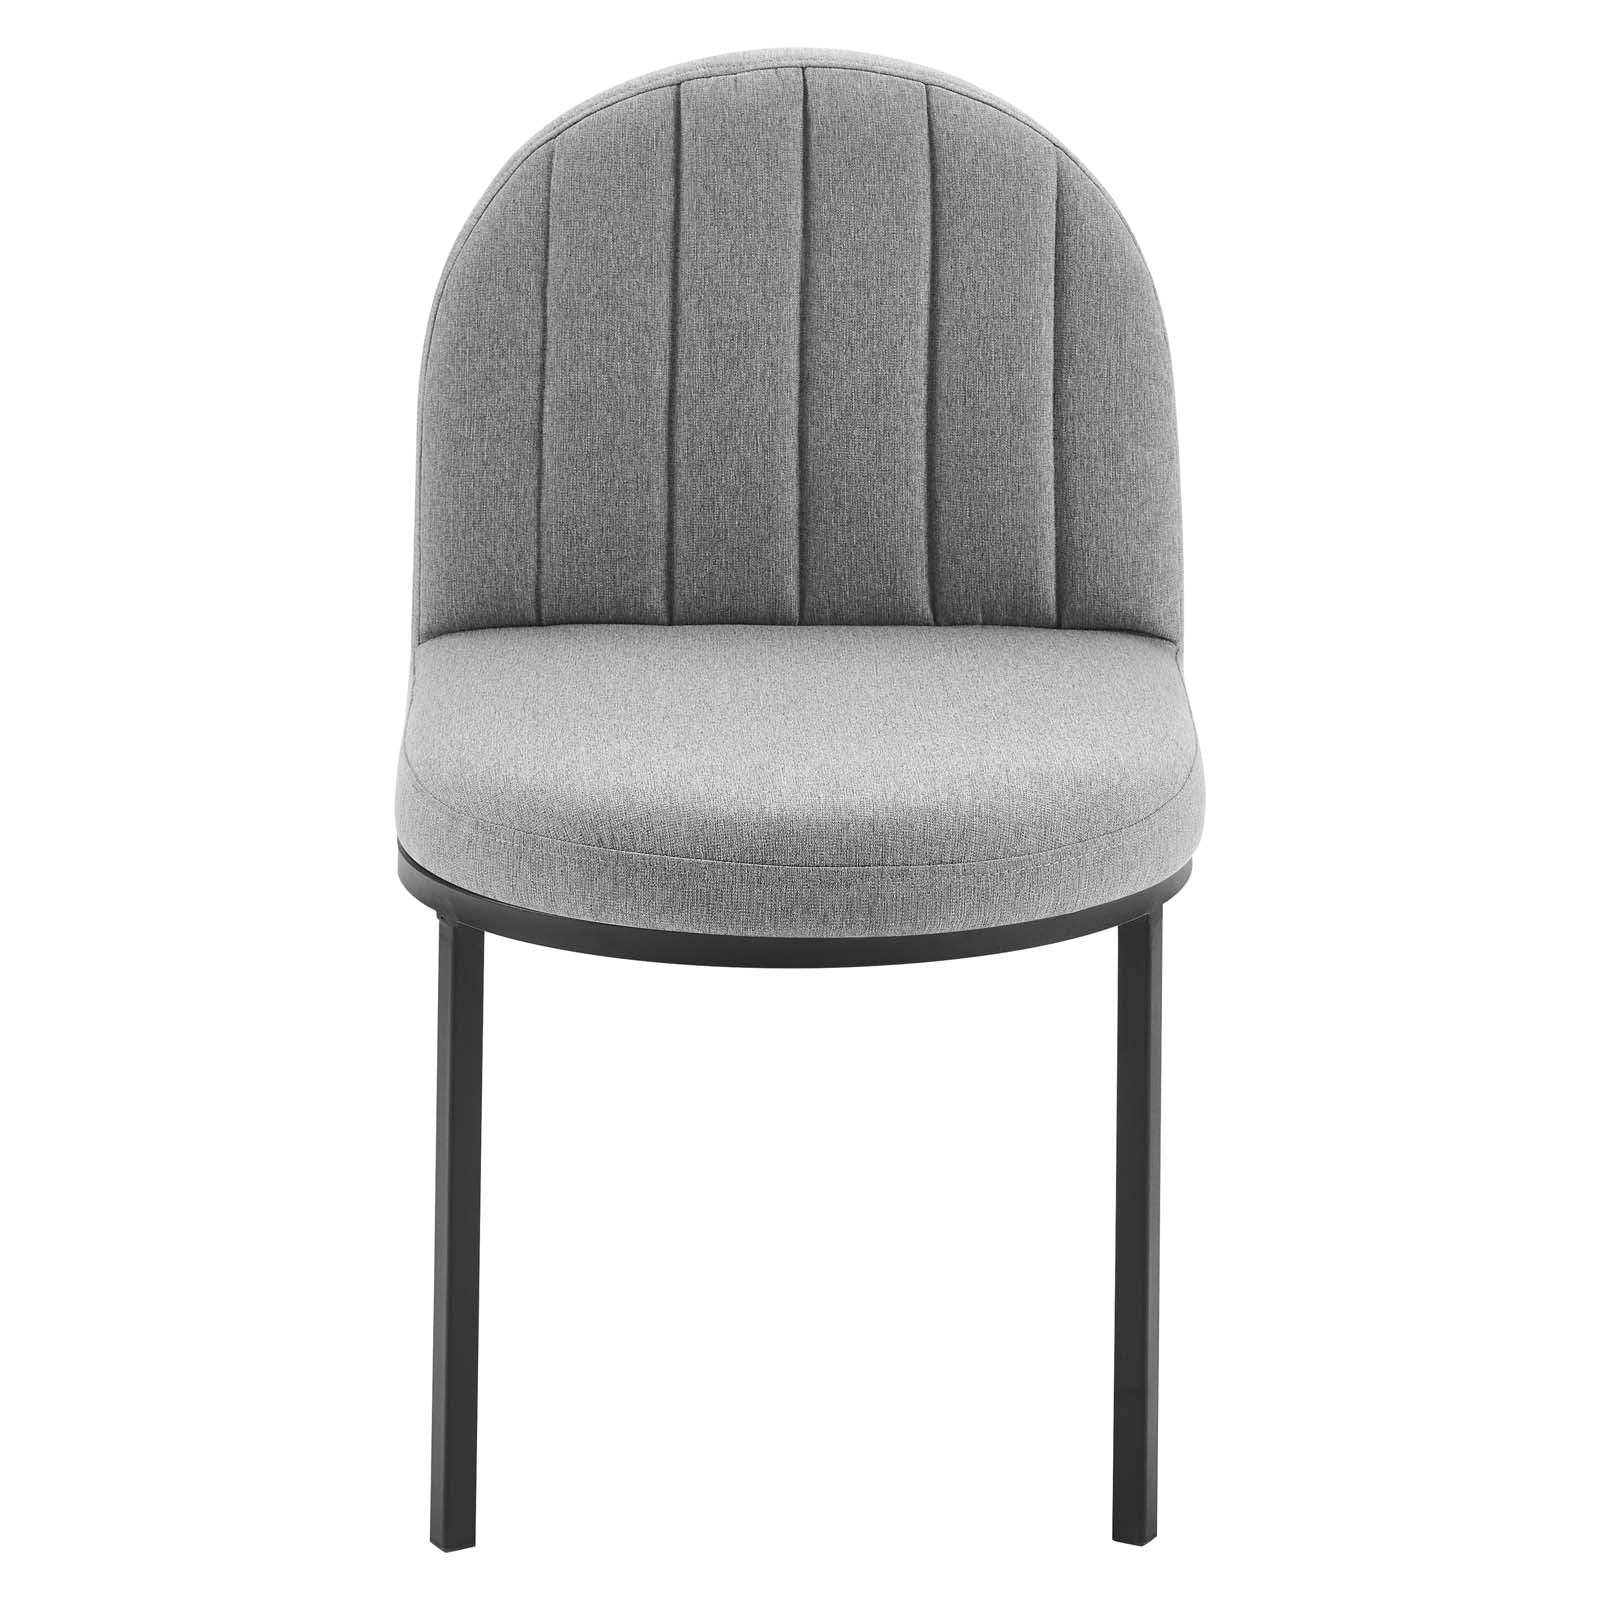 Modway Dining Chairs - Isla Dining Side Chair Upholstered Fabric Black Light Gray (Set of 2)